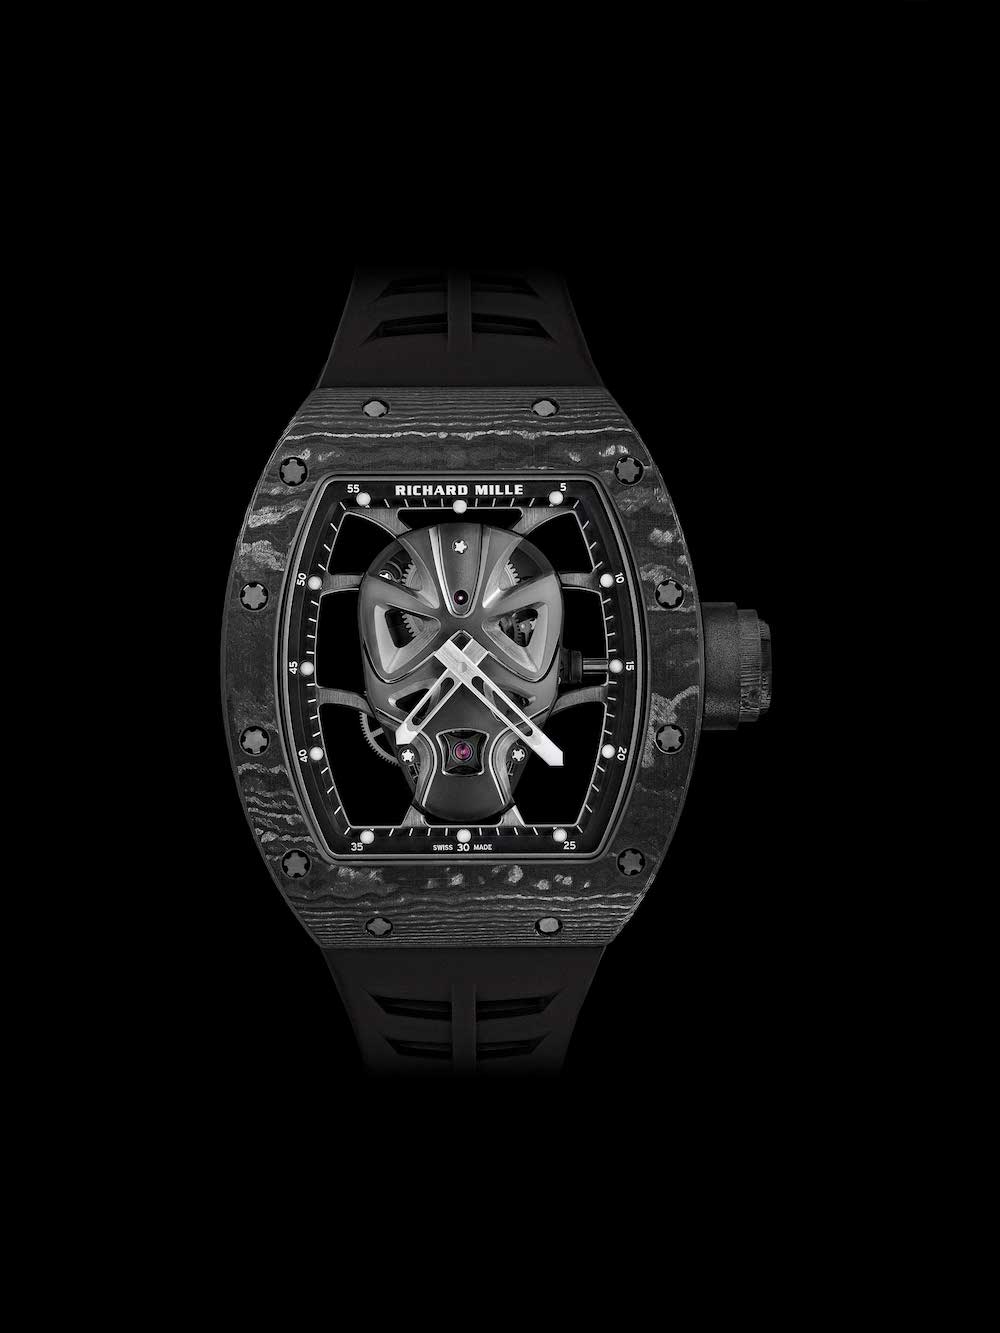 Richard Mille Introduces A New Masked Hero With The RM 52-06